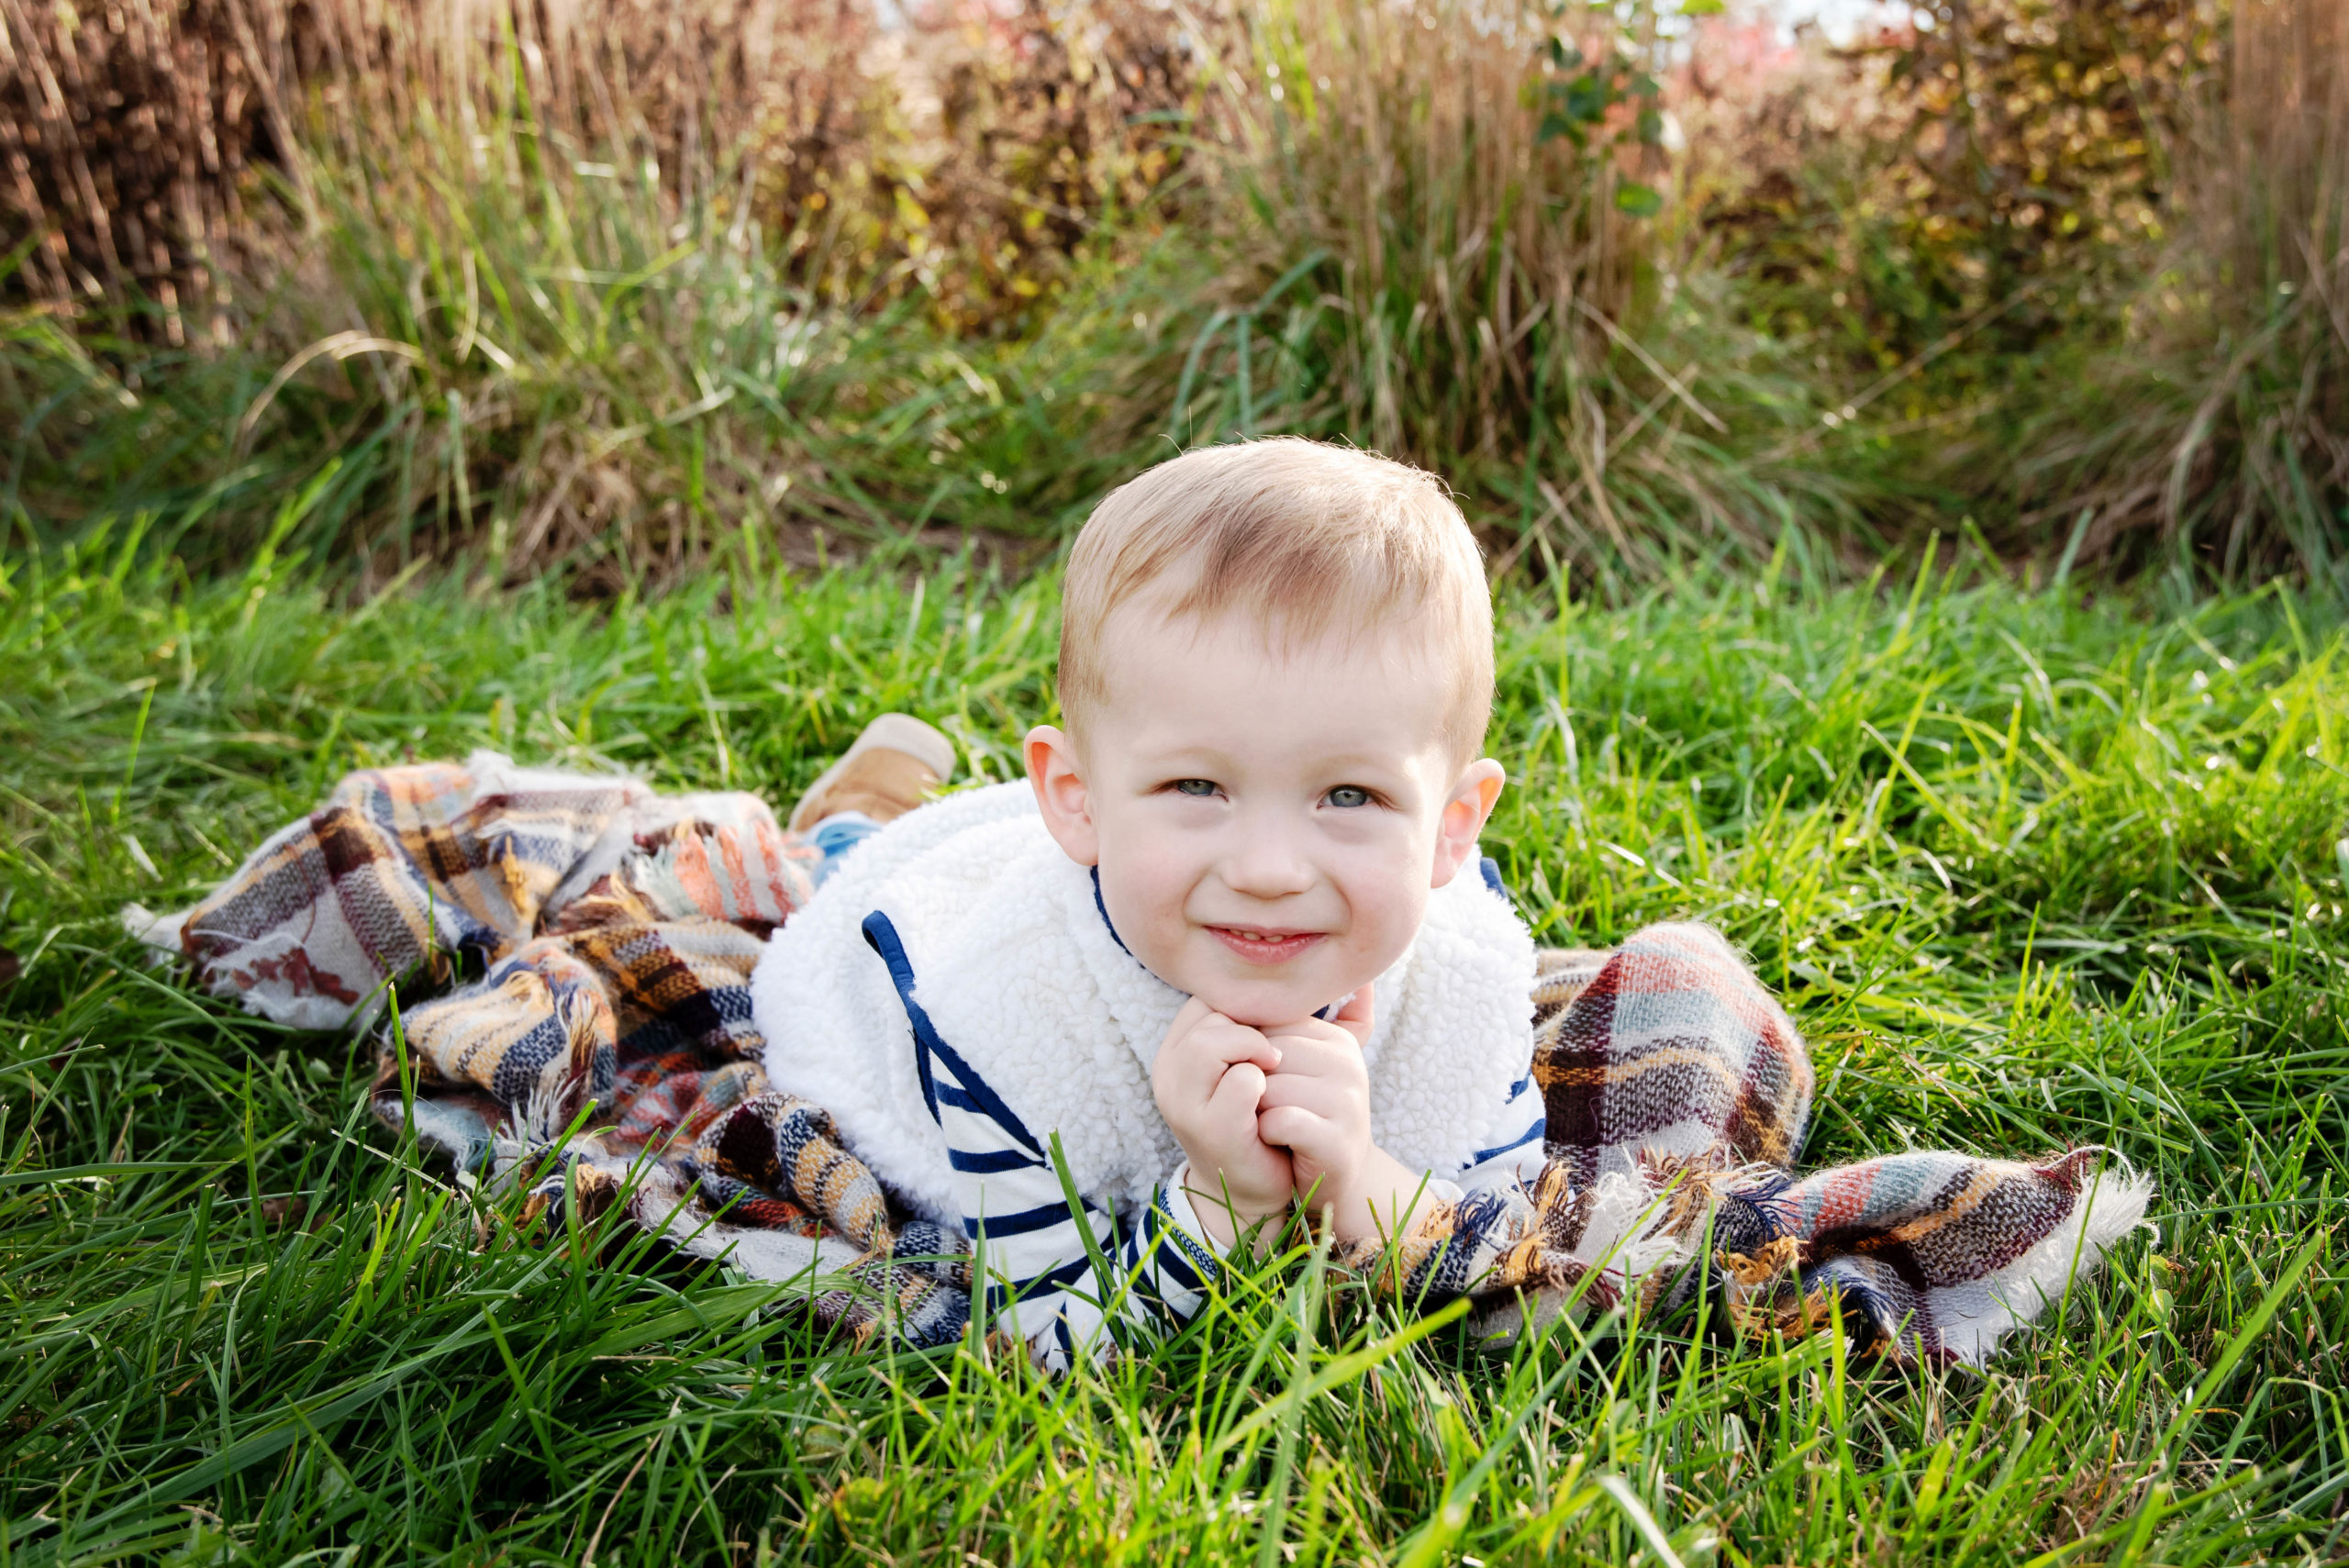 St-Louis-Fall-Mini-Sessions-little-boy-in-grass-with-fall-color-blanket-at-forest-park